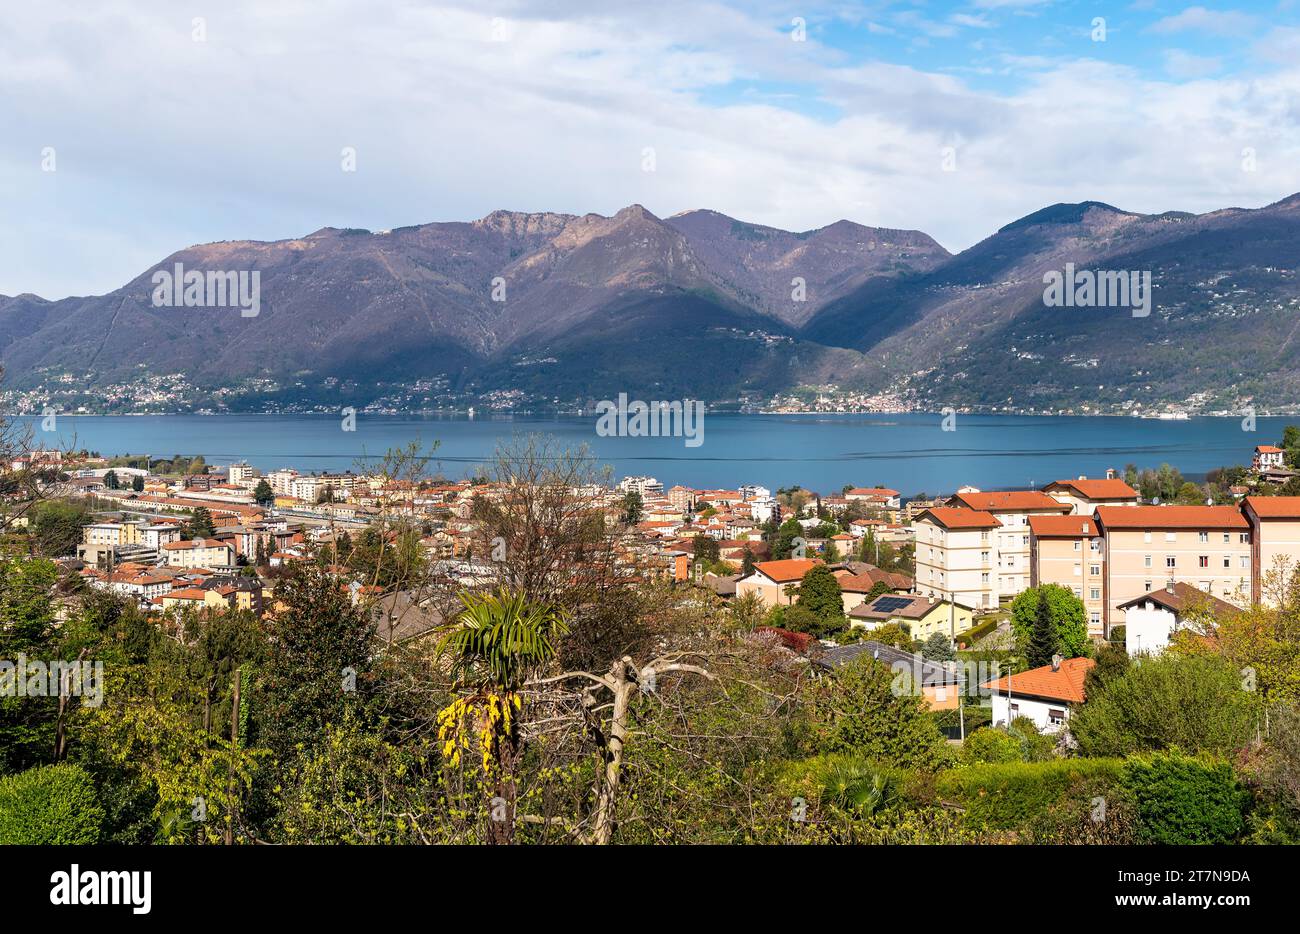 Panorama with a view of the city Luino on Lake Maggiore, province of Varese, Lombardy, Italy Stock Photo